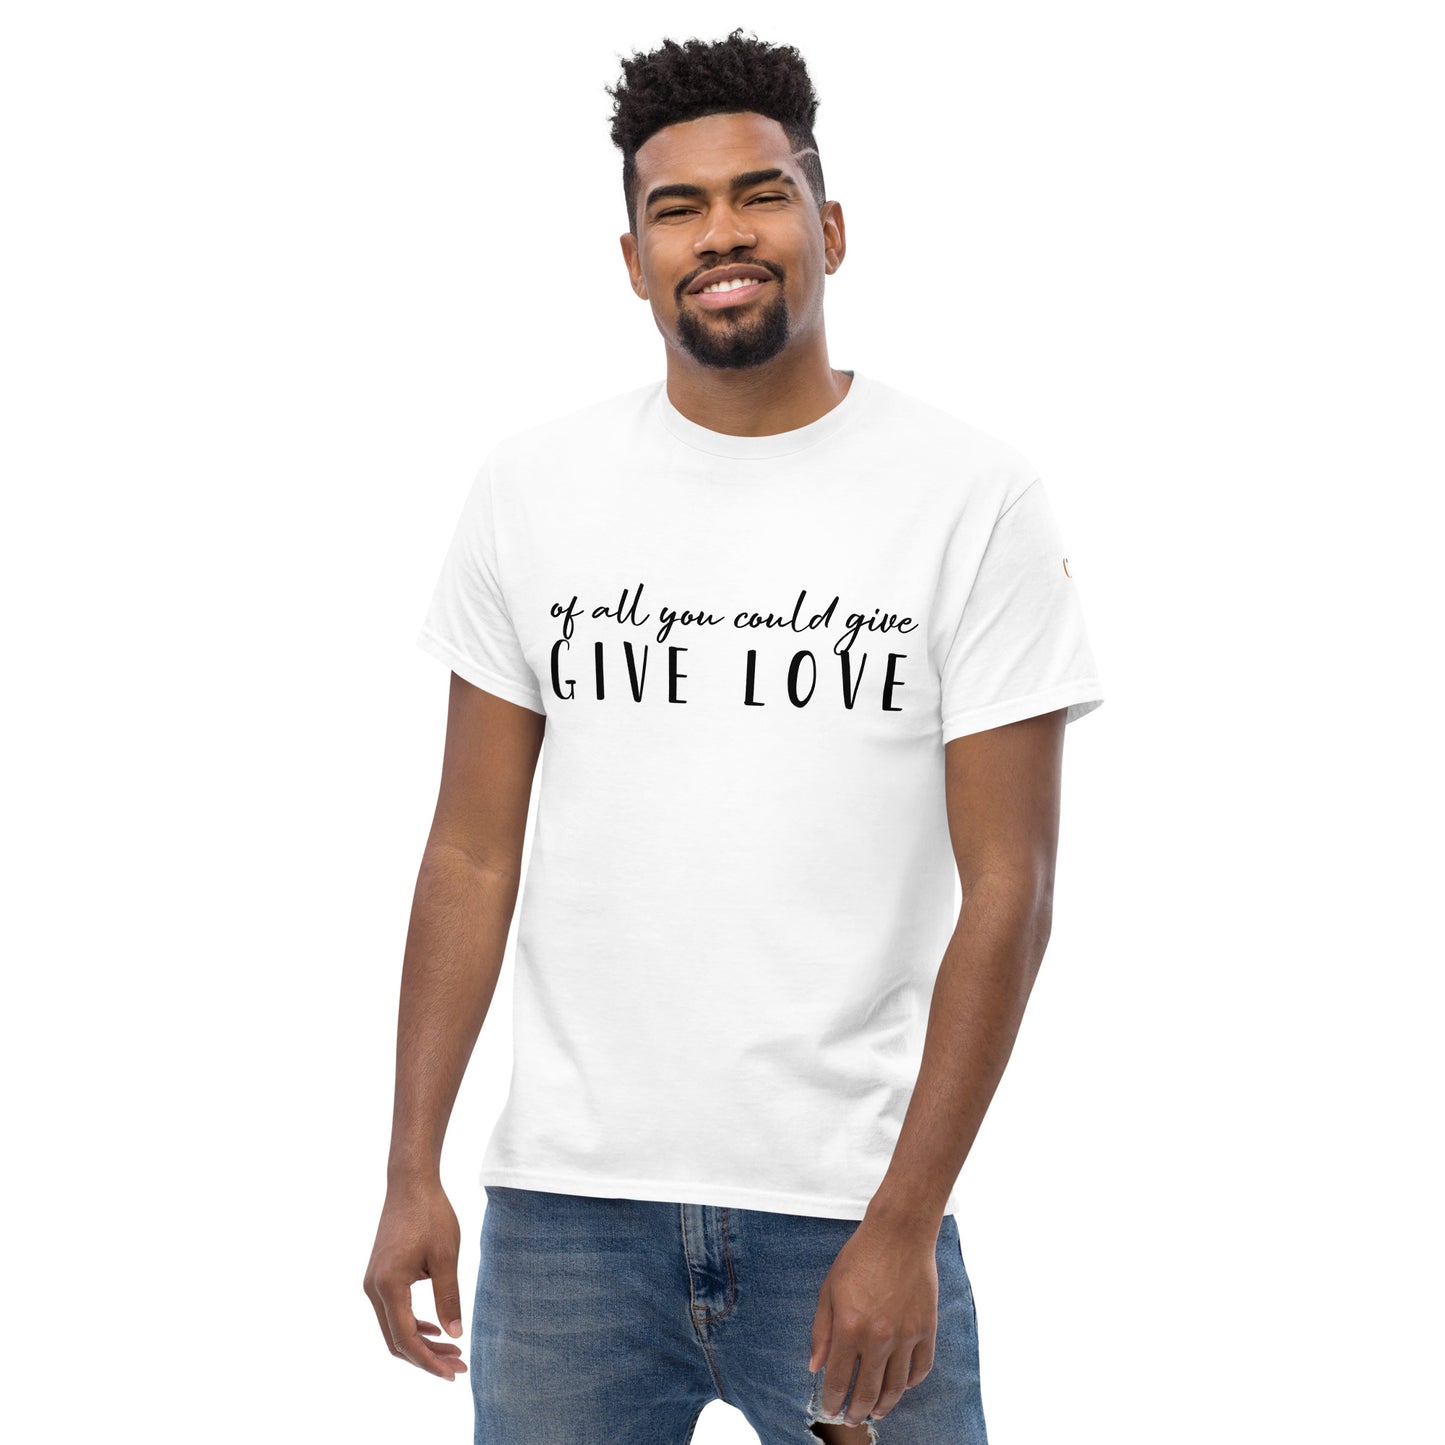 "Give Love" Men's classic tee